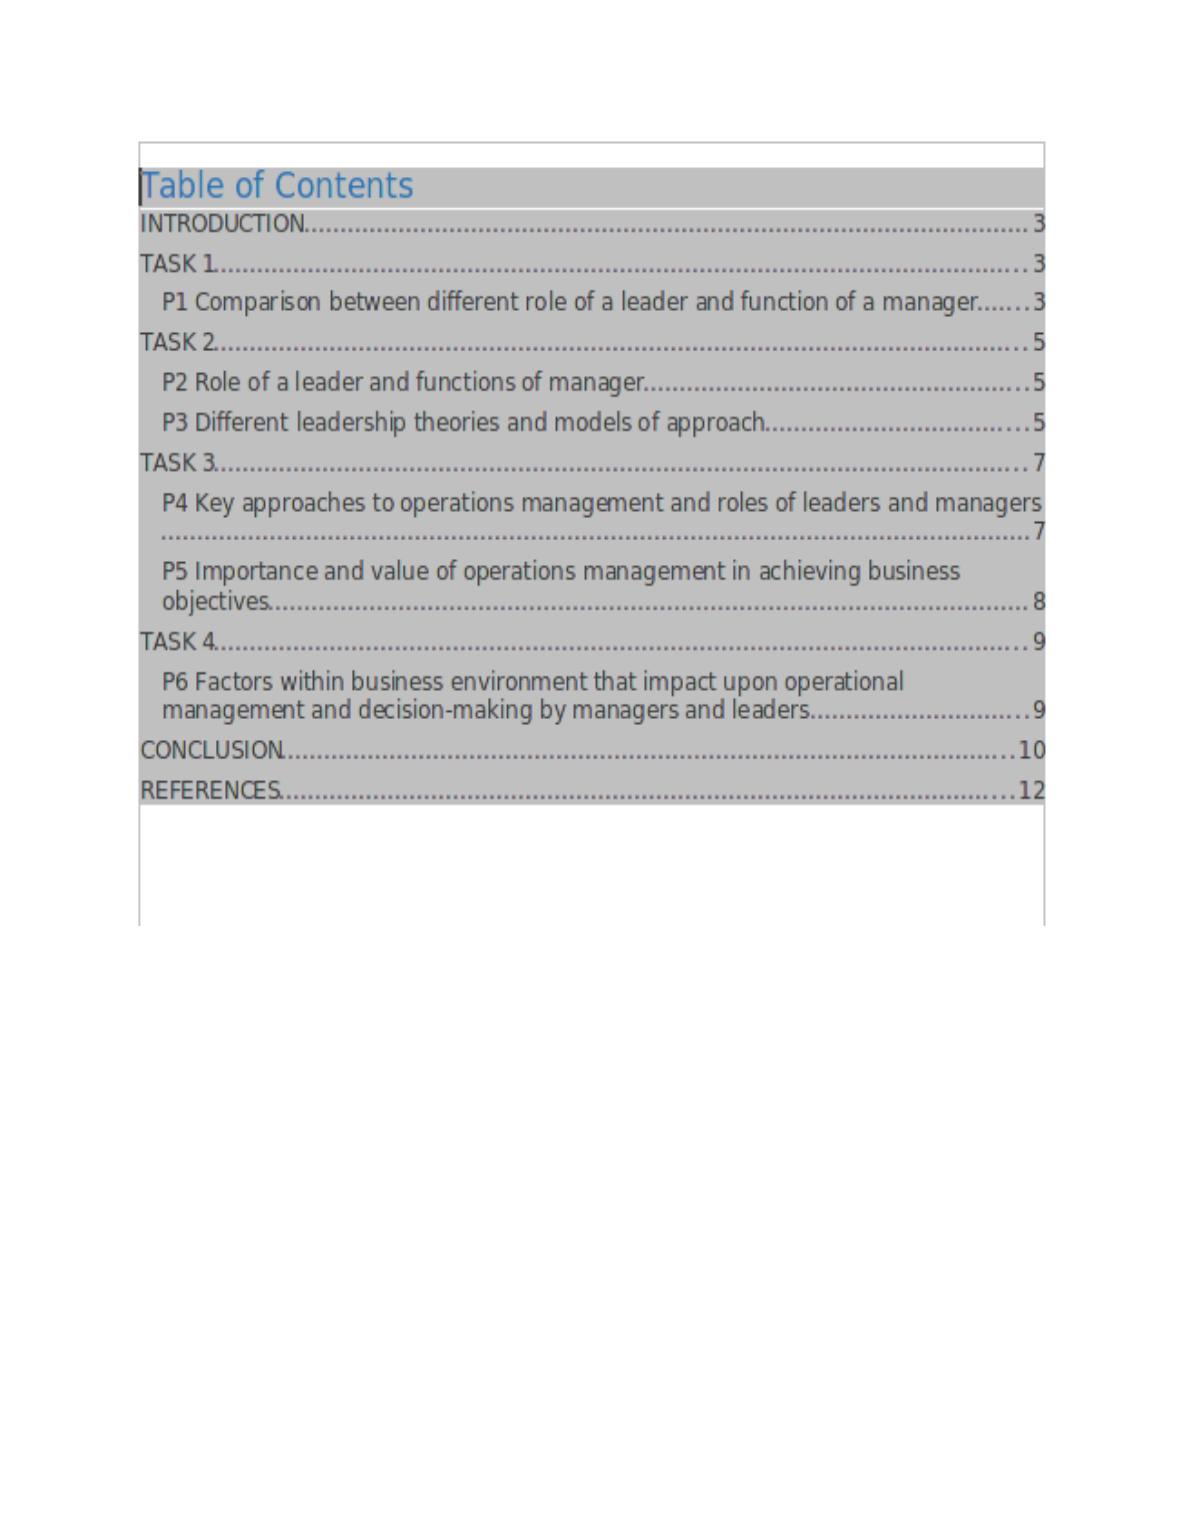 Roles and Characteristics of Manager and Leader in M&S_2